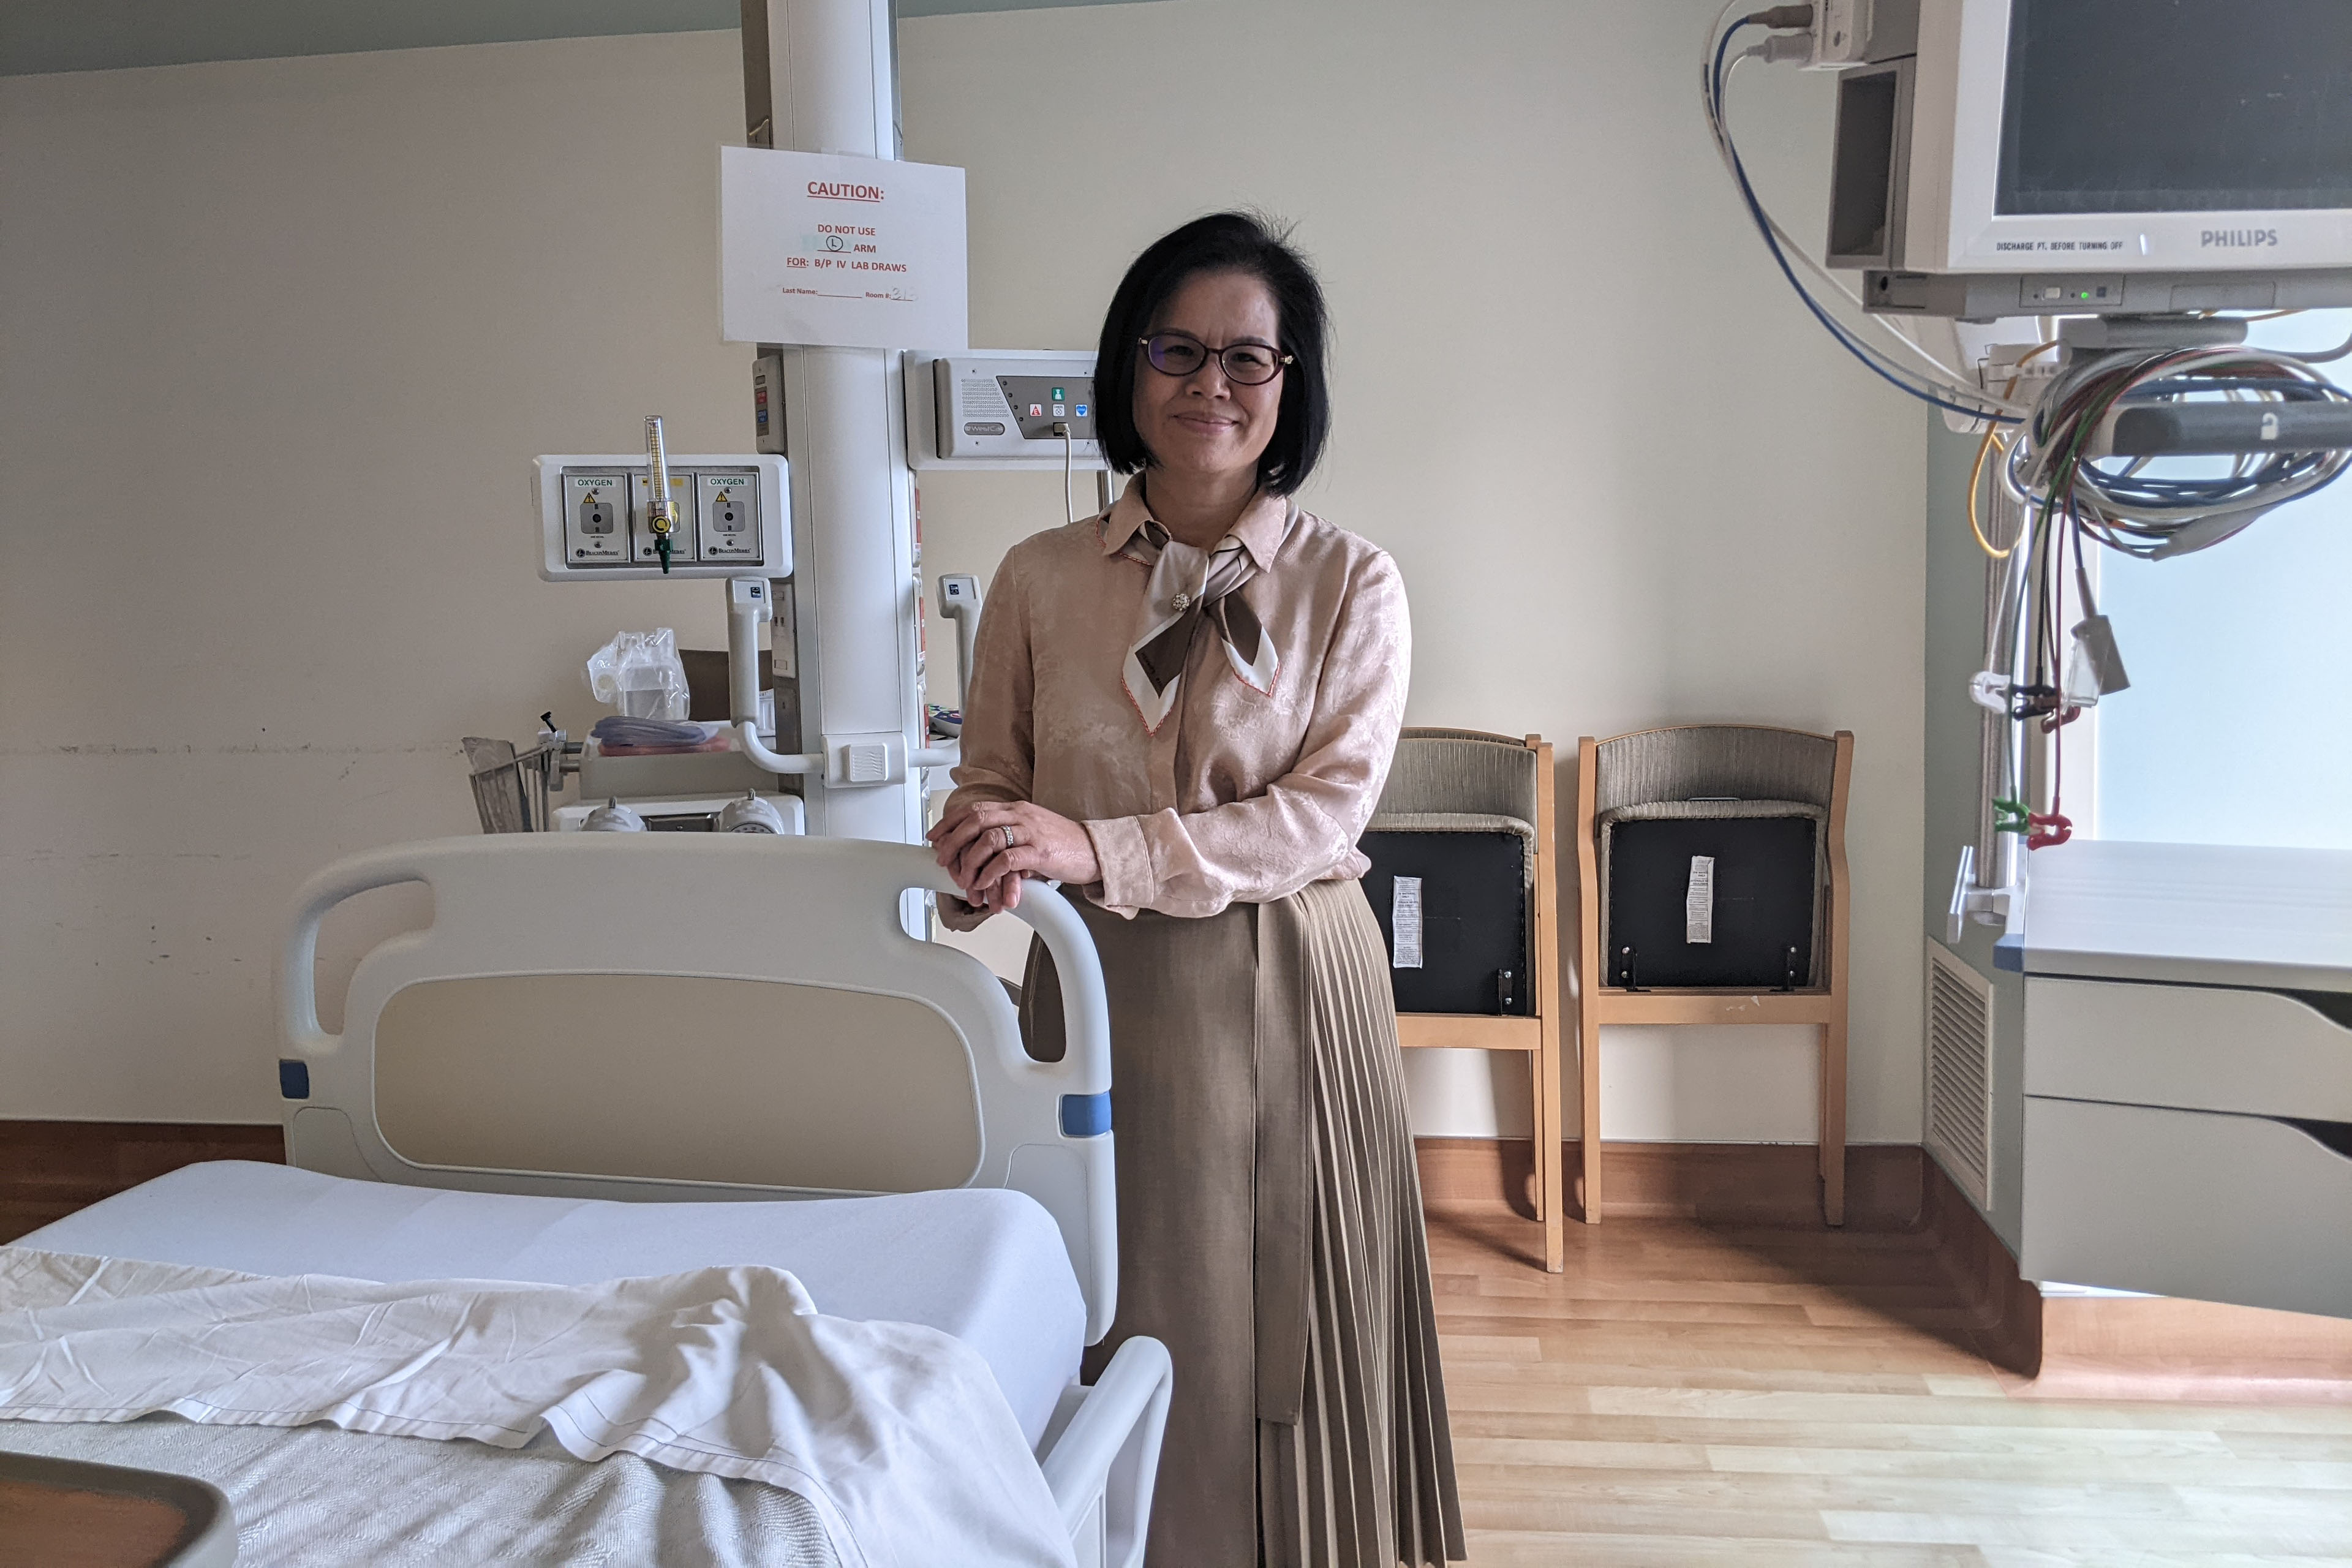 Jian Zhang stands beside a hospital bed and smiles looking toward the camera.